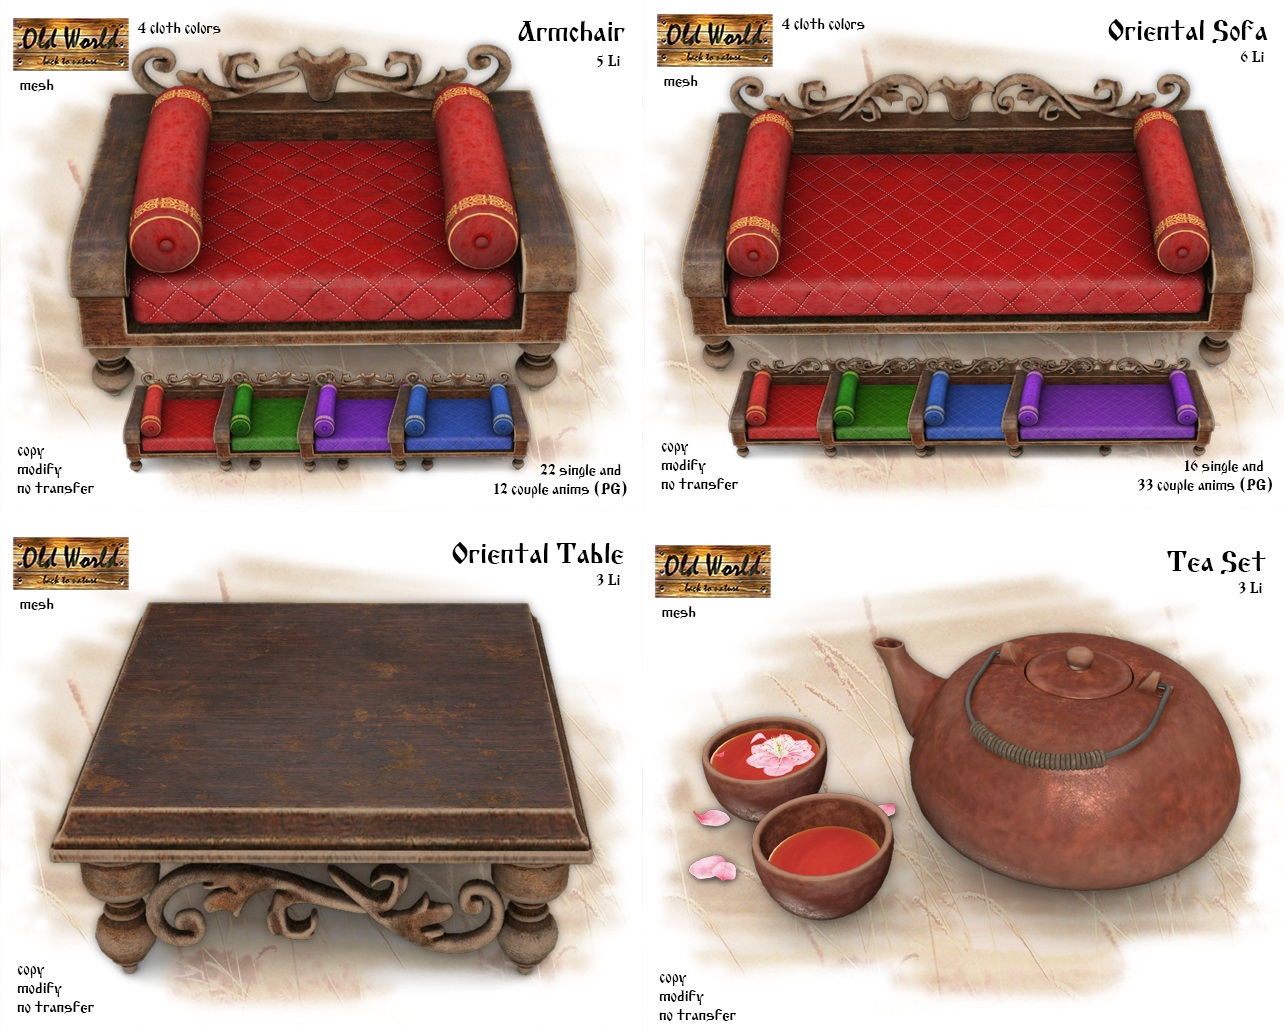 Old World – various furnishings and decor